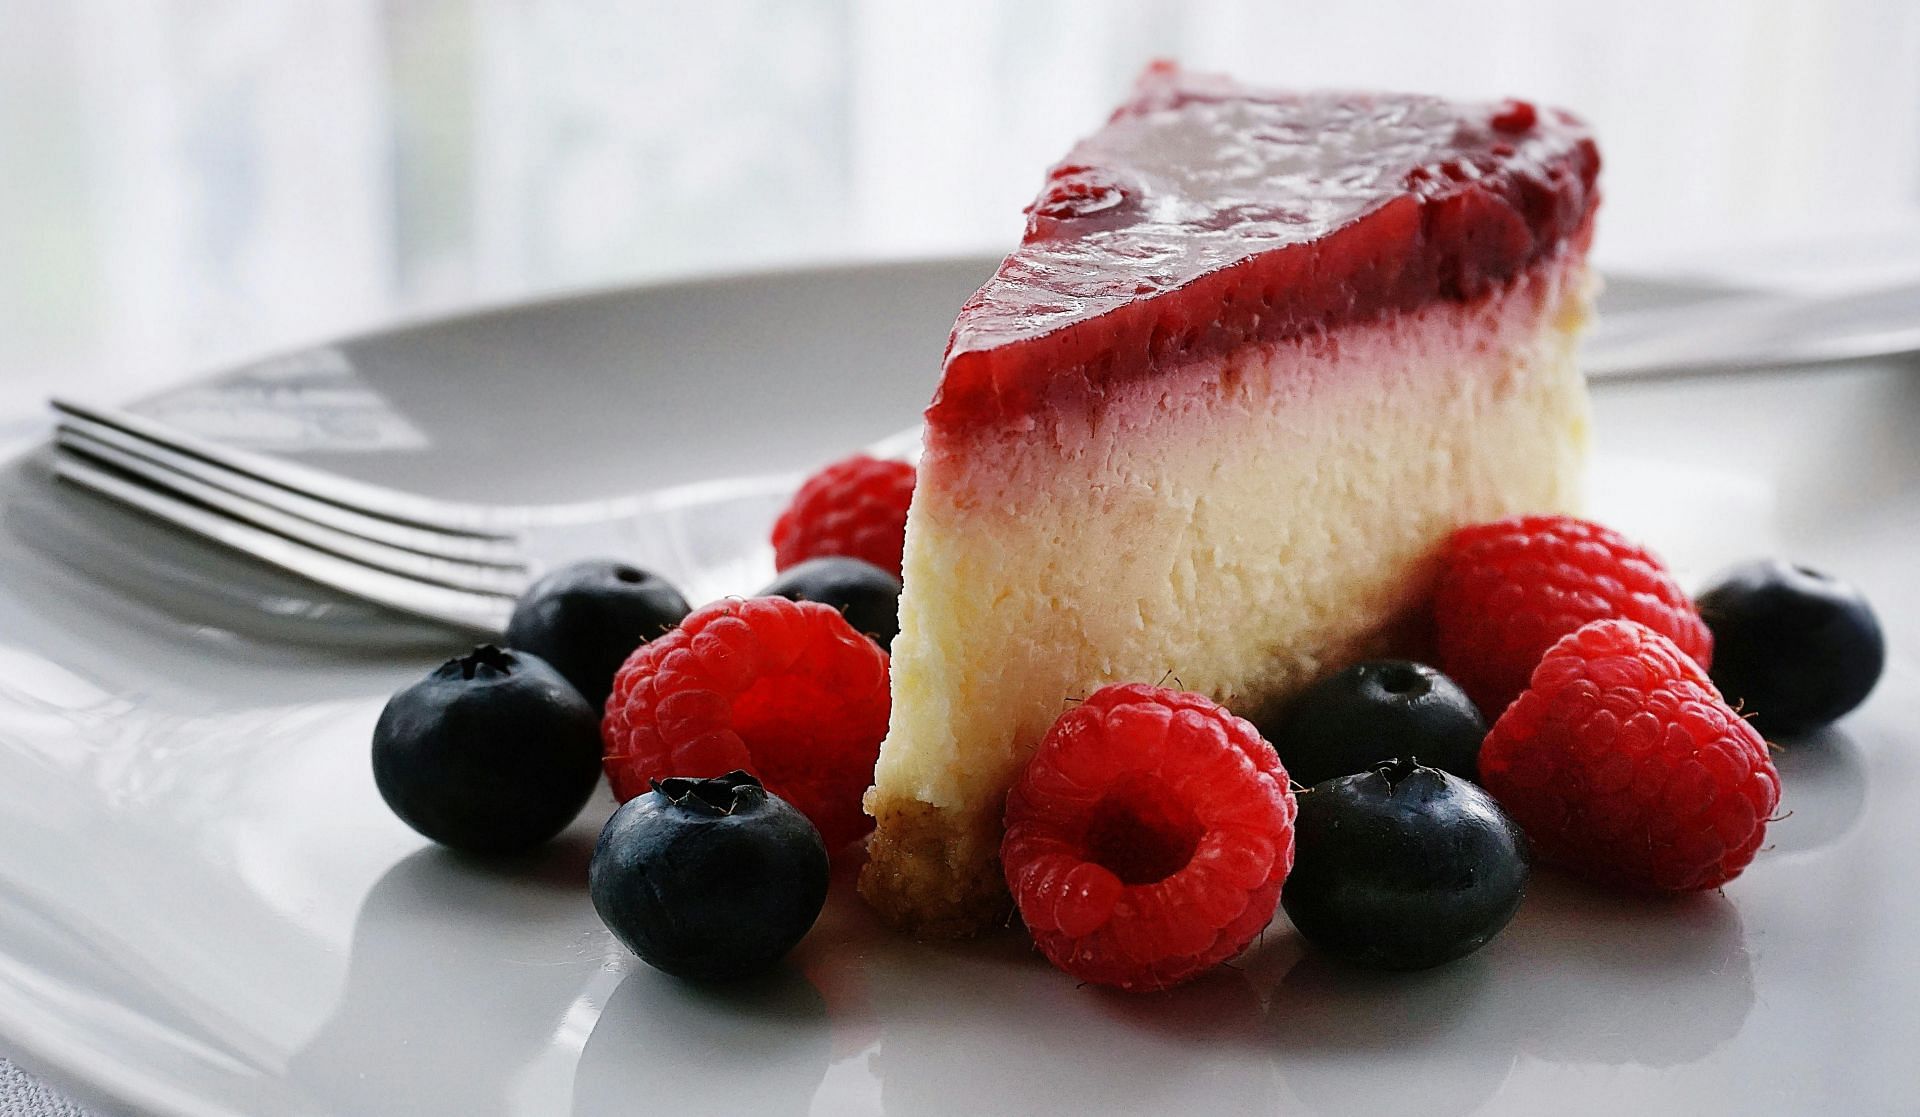 healthy dinner desserts (image sourced via Pexels / Photo by suzy)